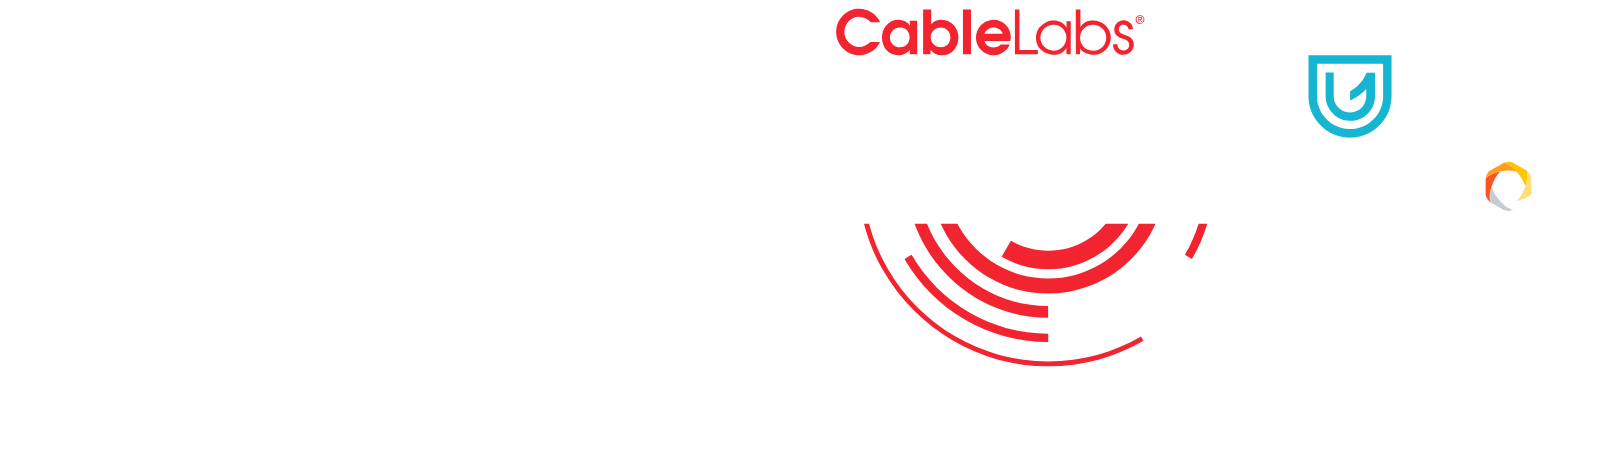 Summer Conference 2018